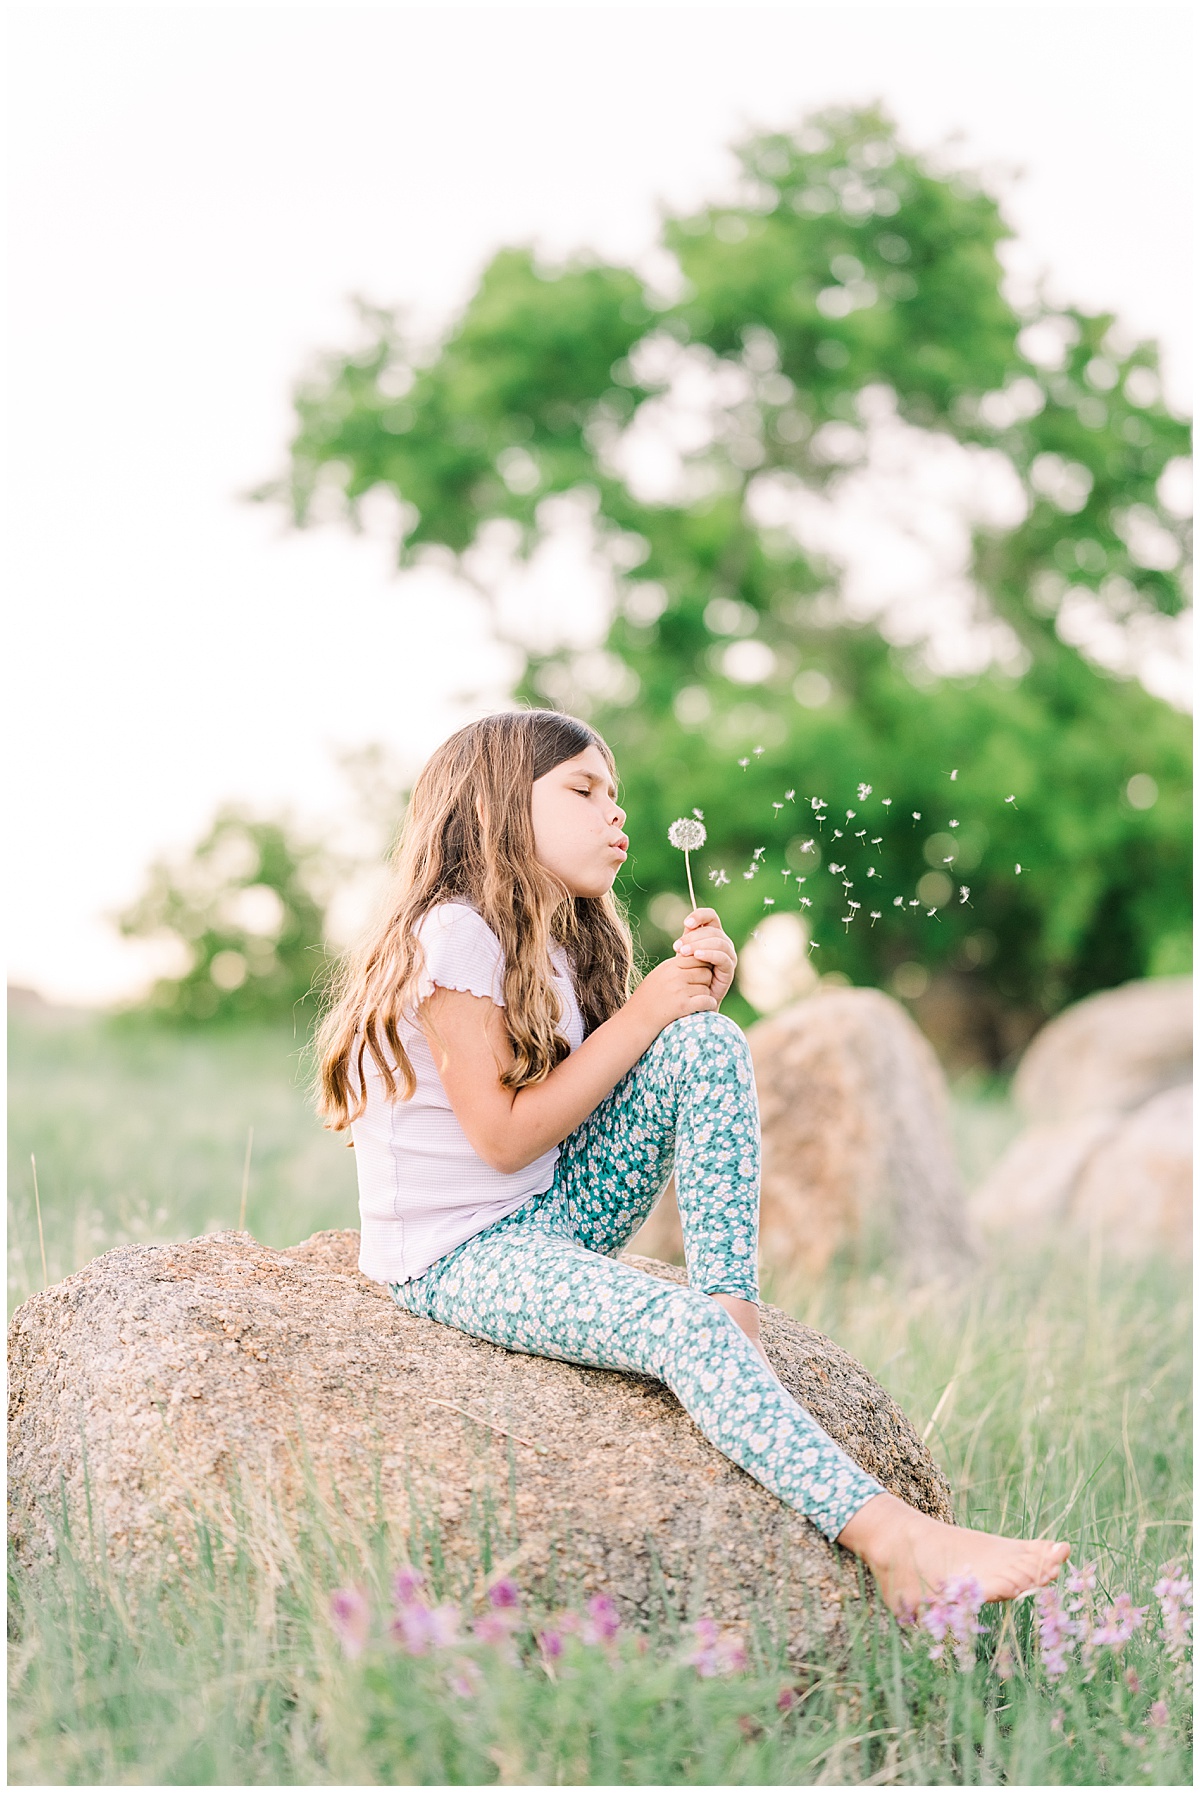 Girl Blowing a Dandelion, Relics of Rainbows Photo 